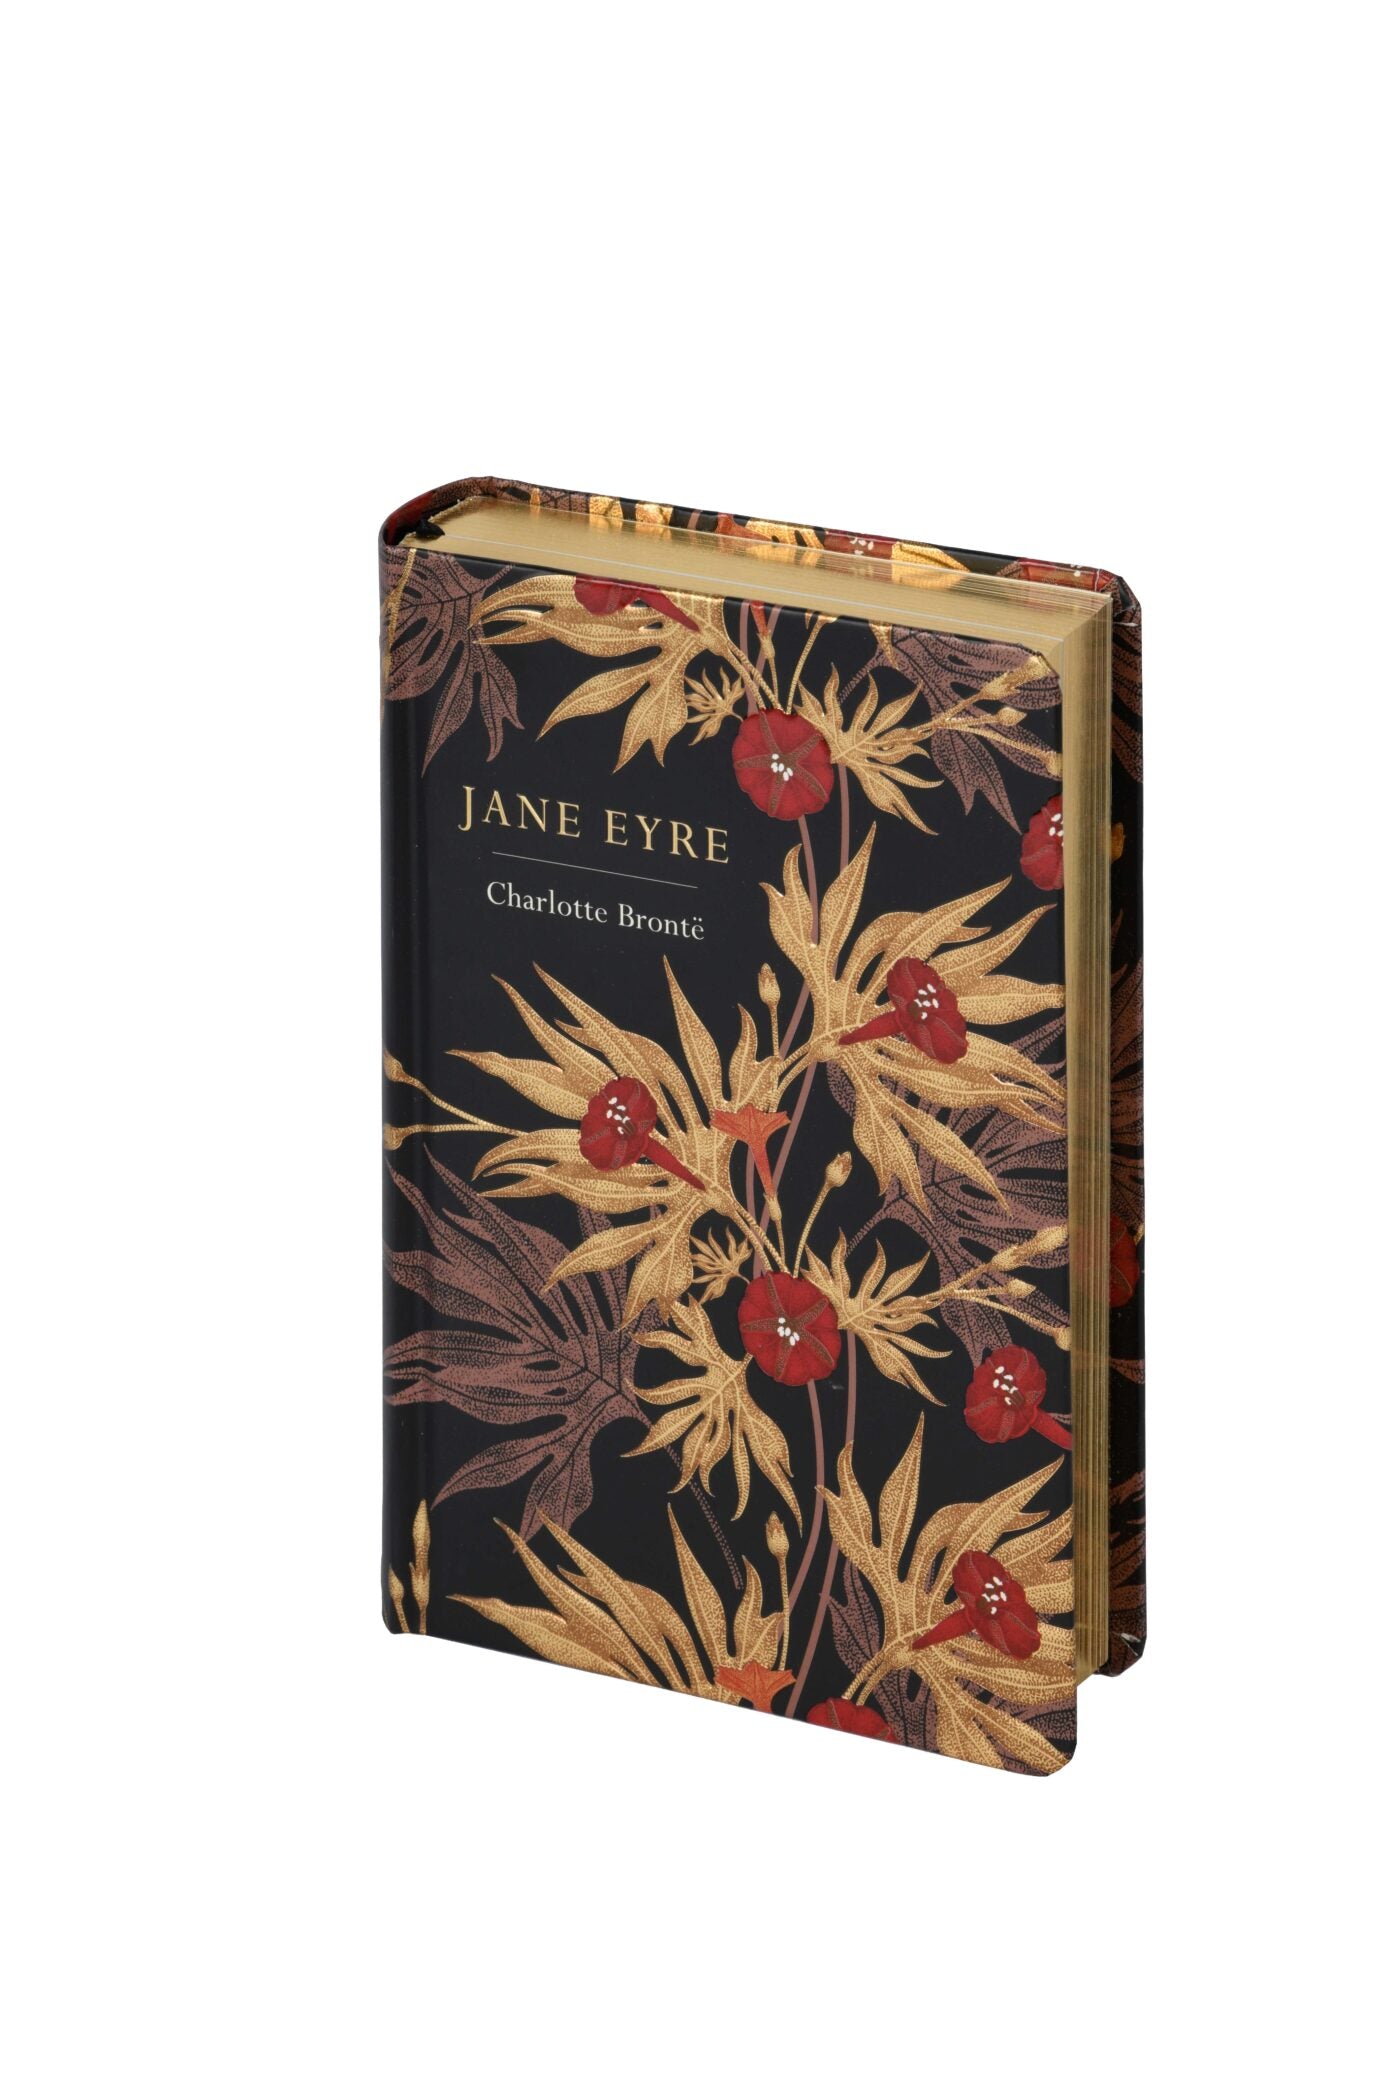 Jane Eyre by Charlotte Bronte (Chiltern Classics)